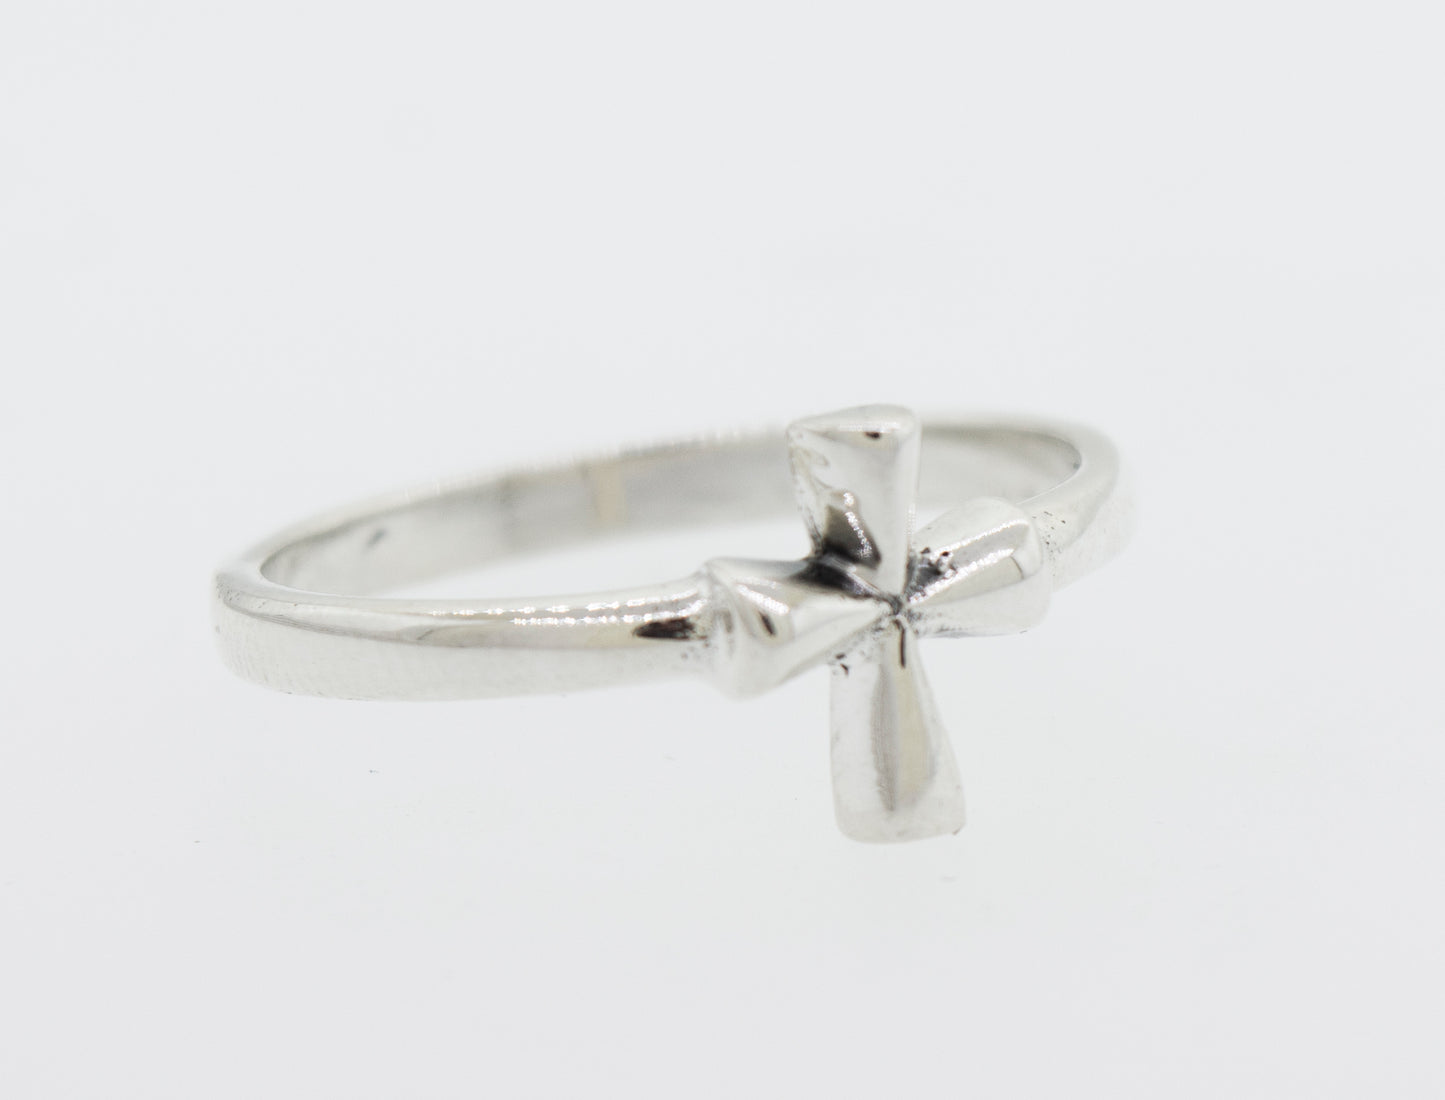 A vertical Simple Cross Ring by Super Silver on a white background.